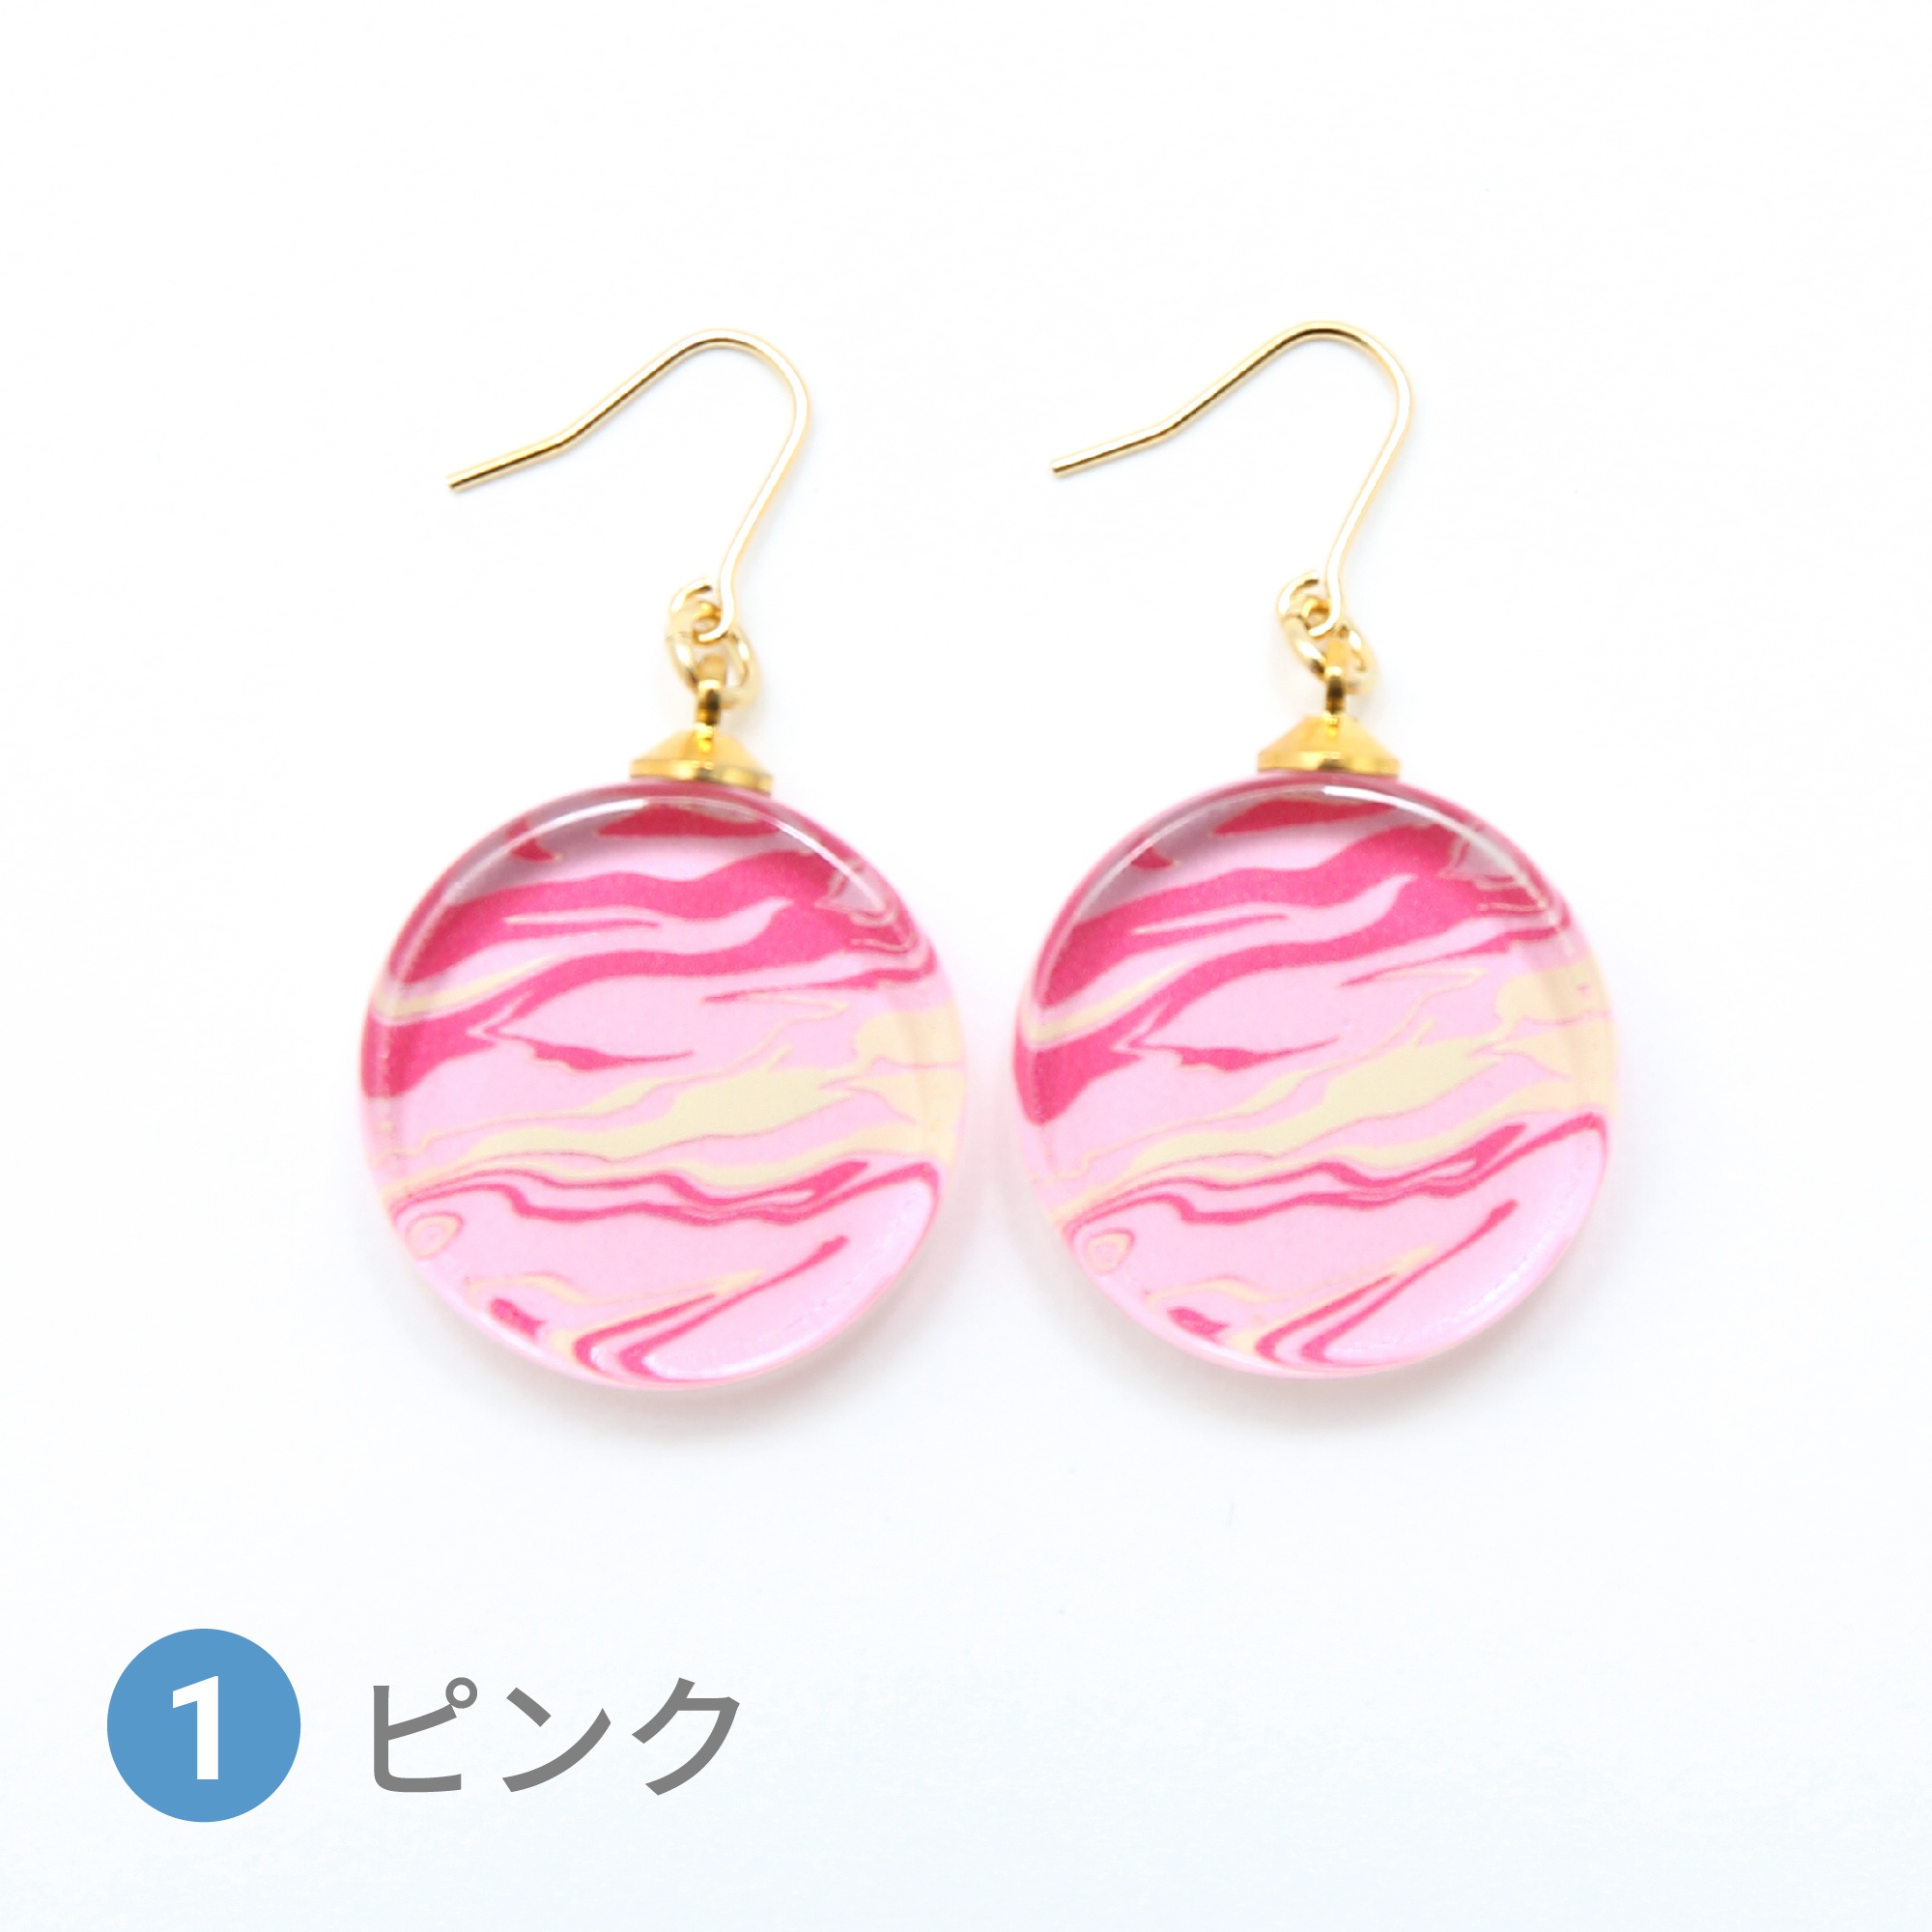 Glass accessories Pierced Earring MARBLE pink round shape